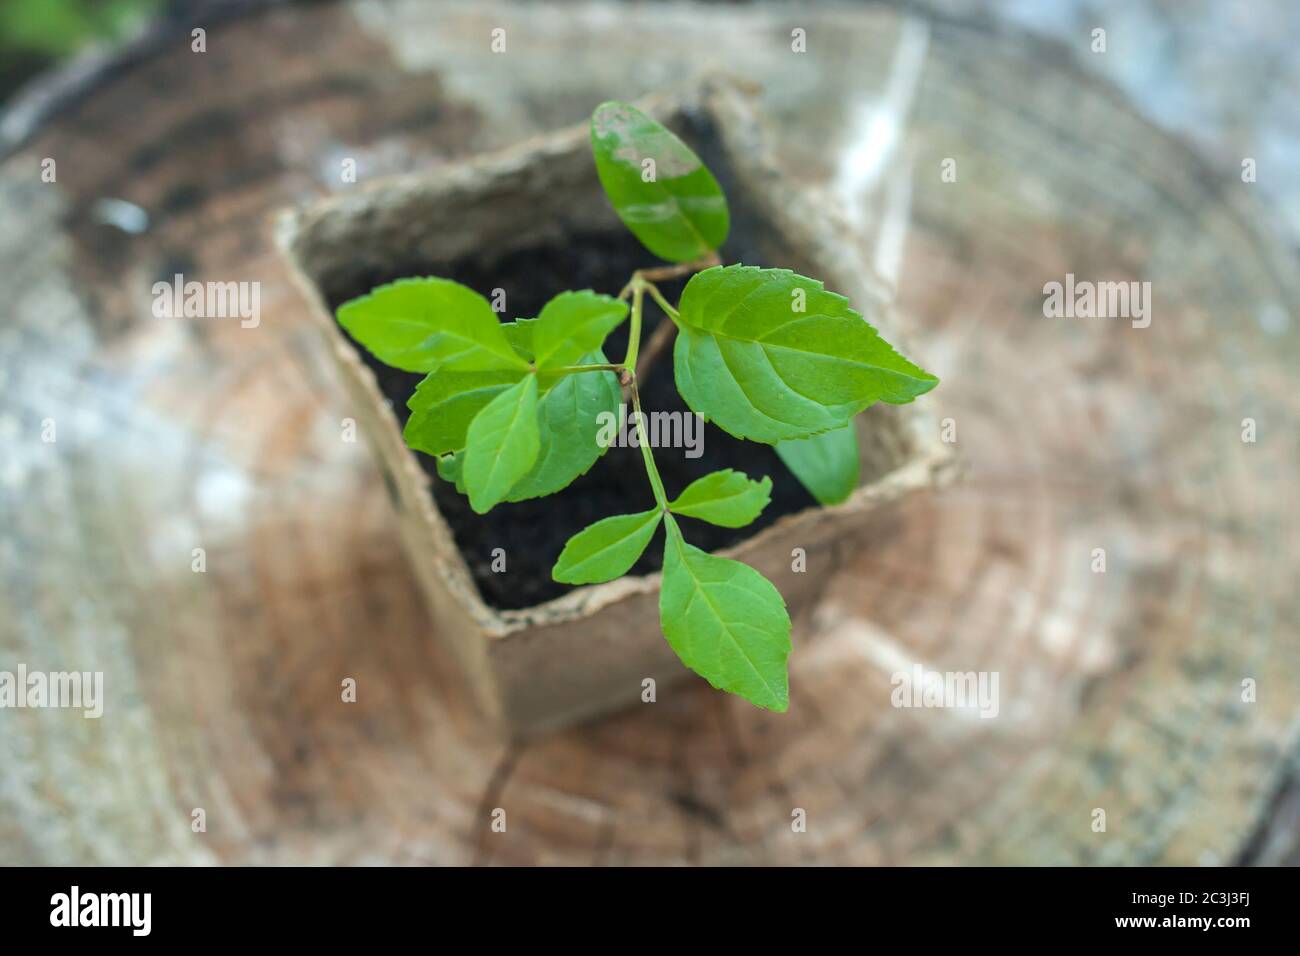 Small plant growing in a seedling pot Stock Photo